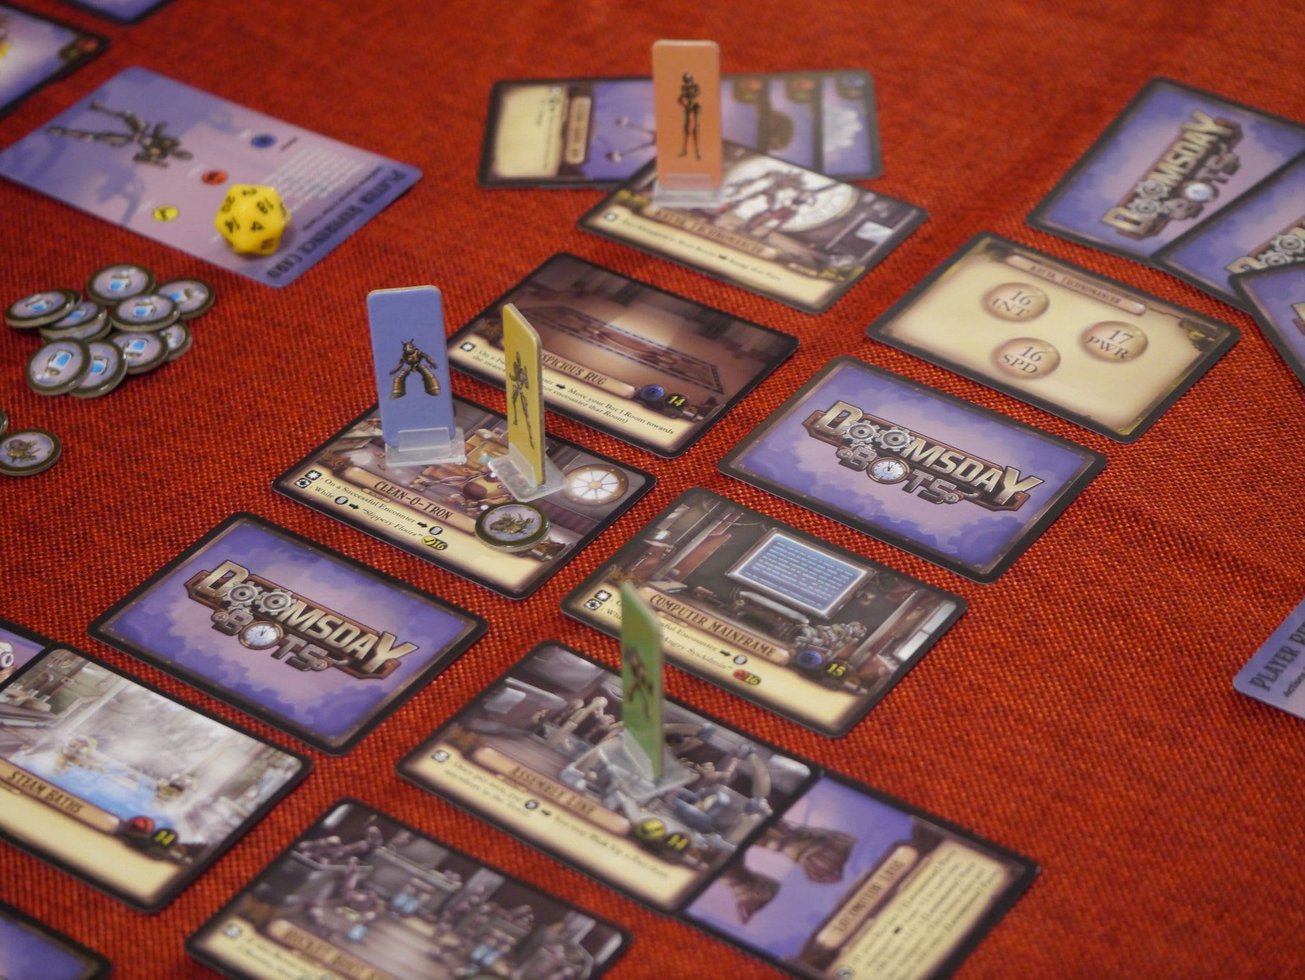 Elaine Lithgow on the Struggle of Creating a Board Game image